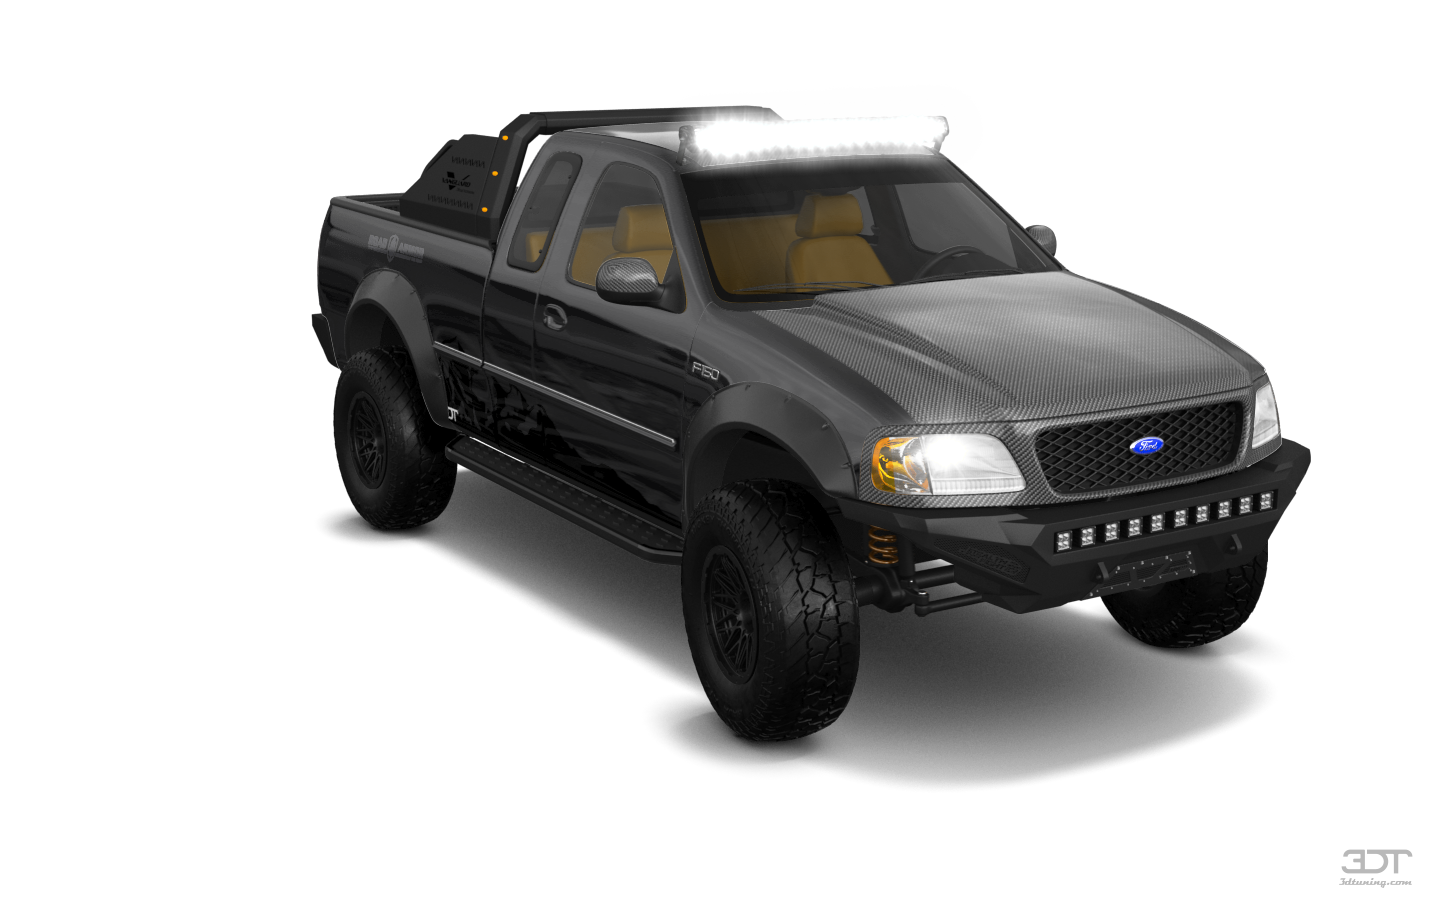 Ford F-150 SuperCab 2 Door pickup truck 1997